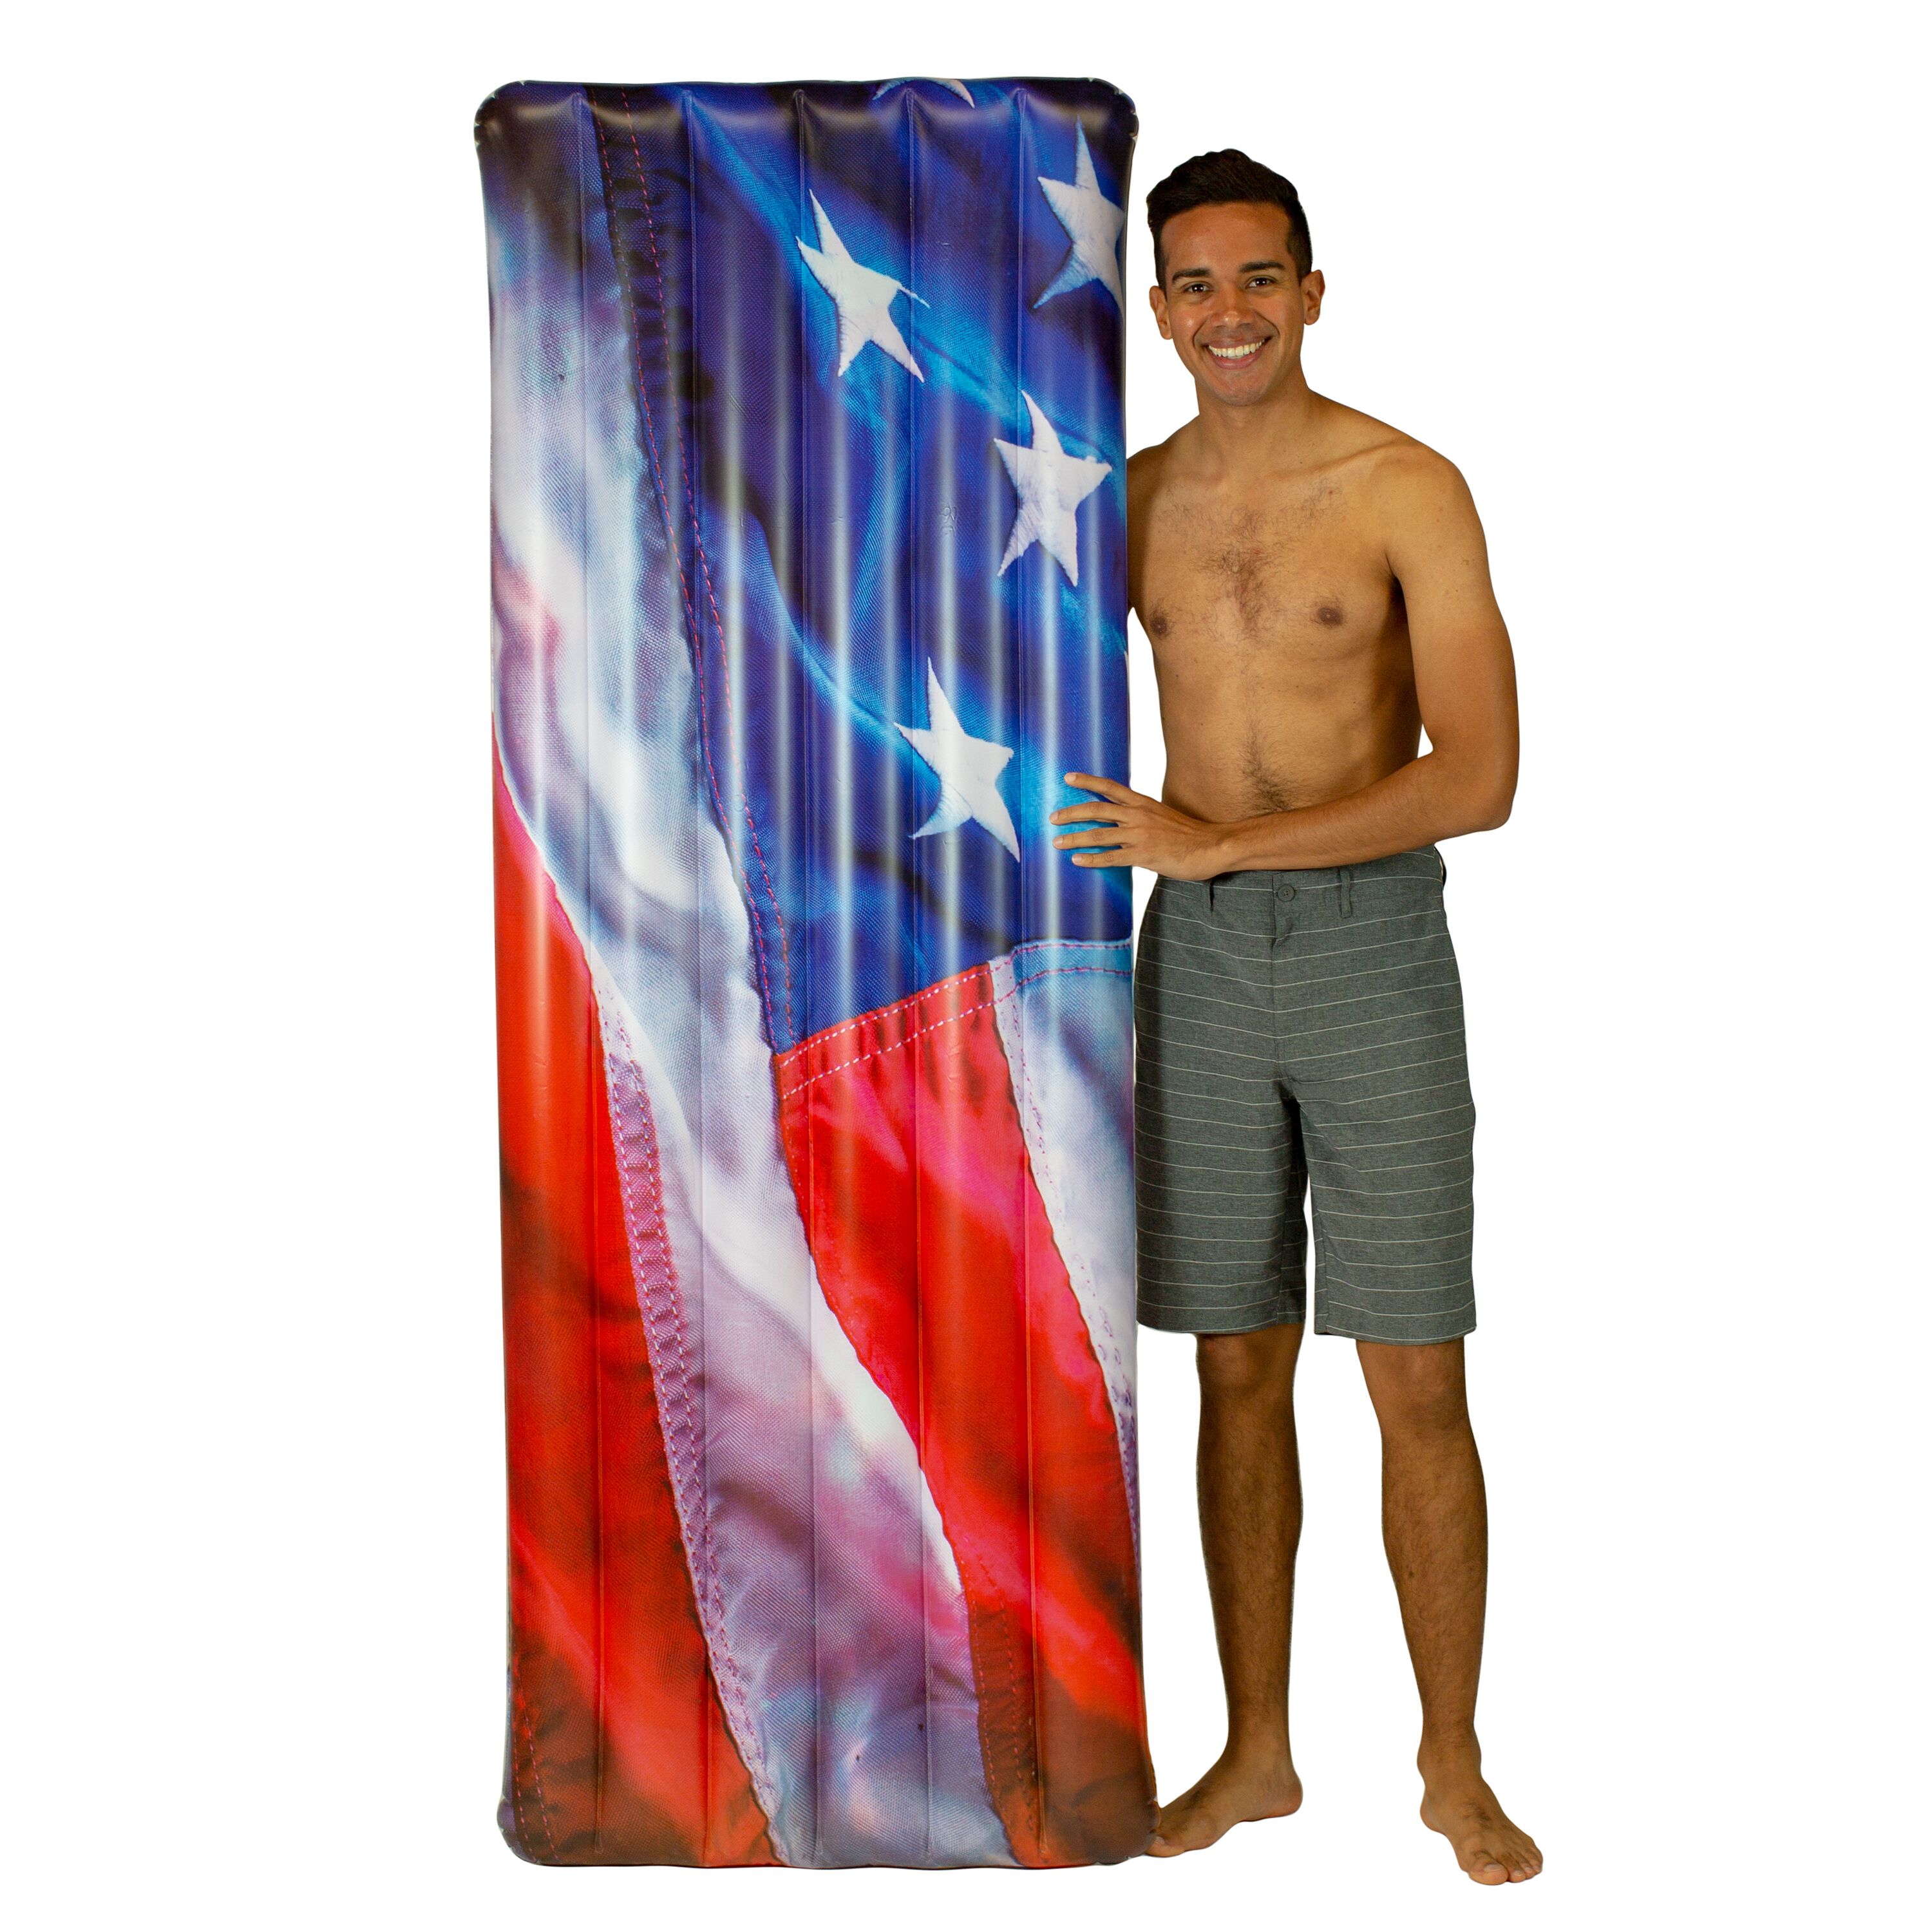 PoolCandy Stars and Stripes Deluxe Pool Raft